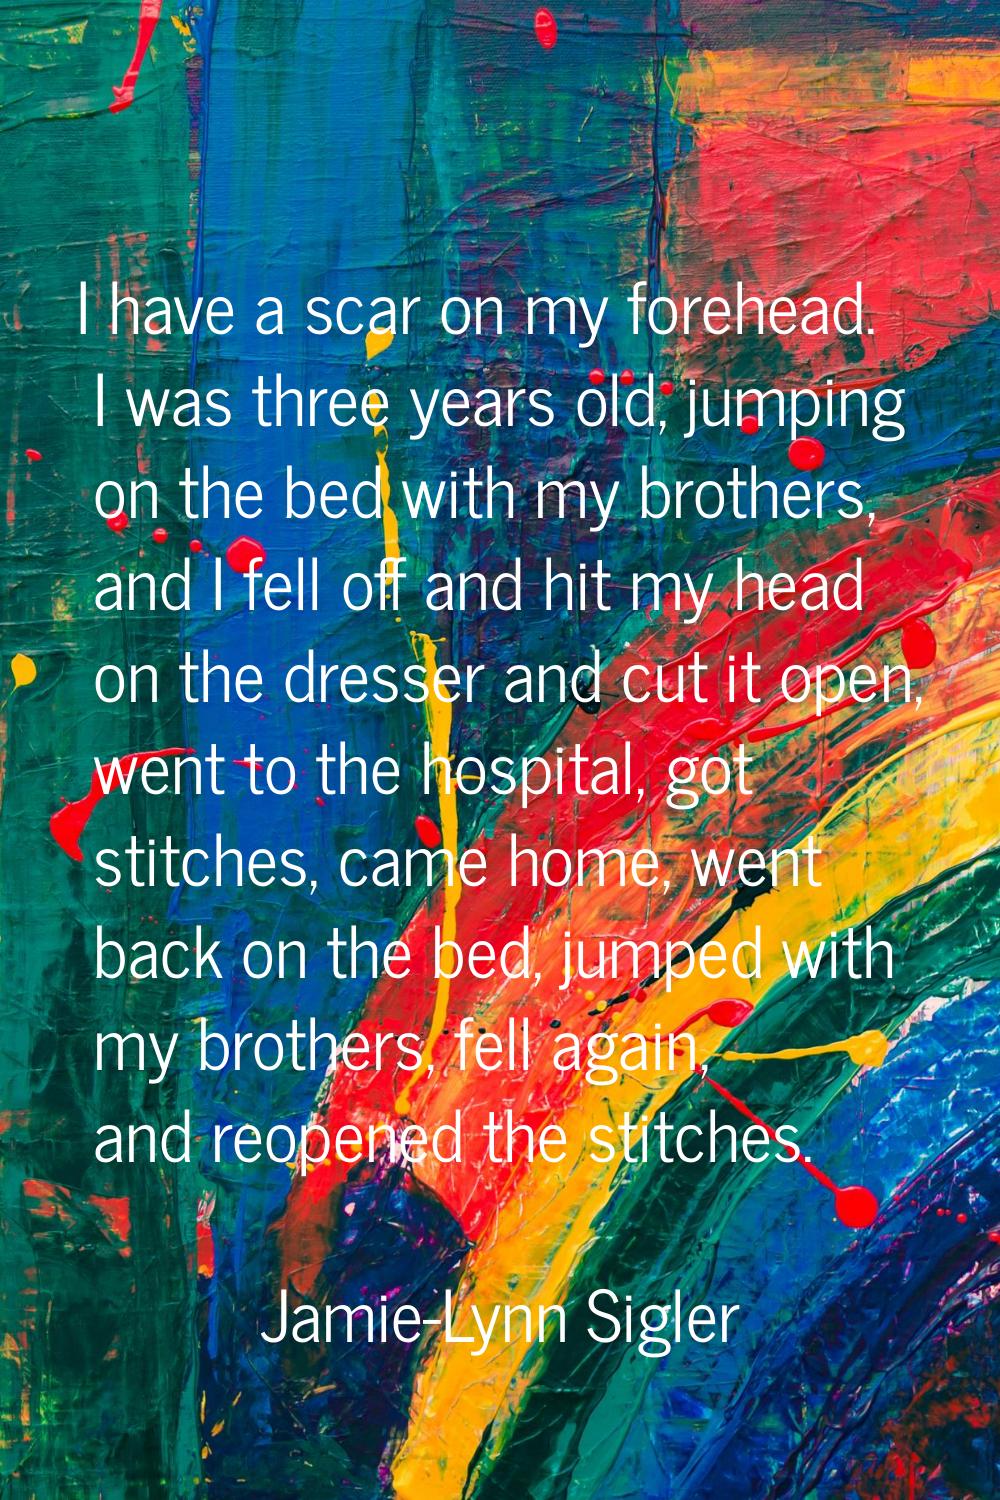 I have a scar on my forehead. I was three years old, jumping on the bed with my brothers, and I fel